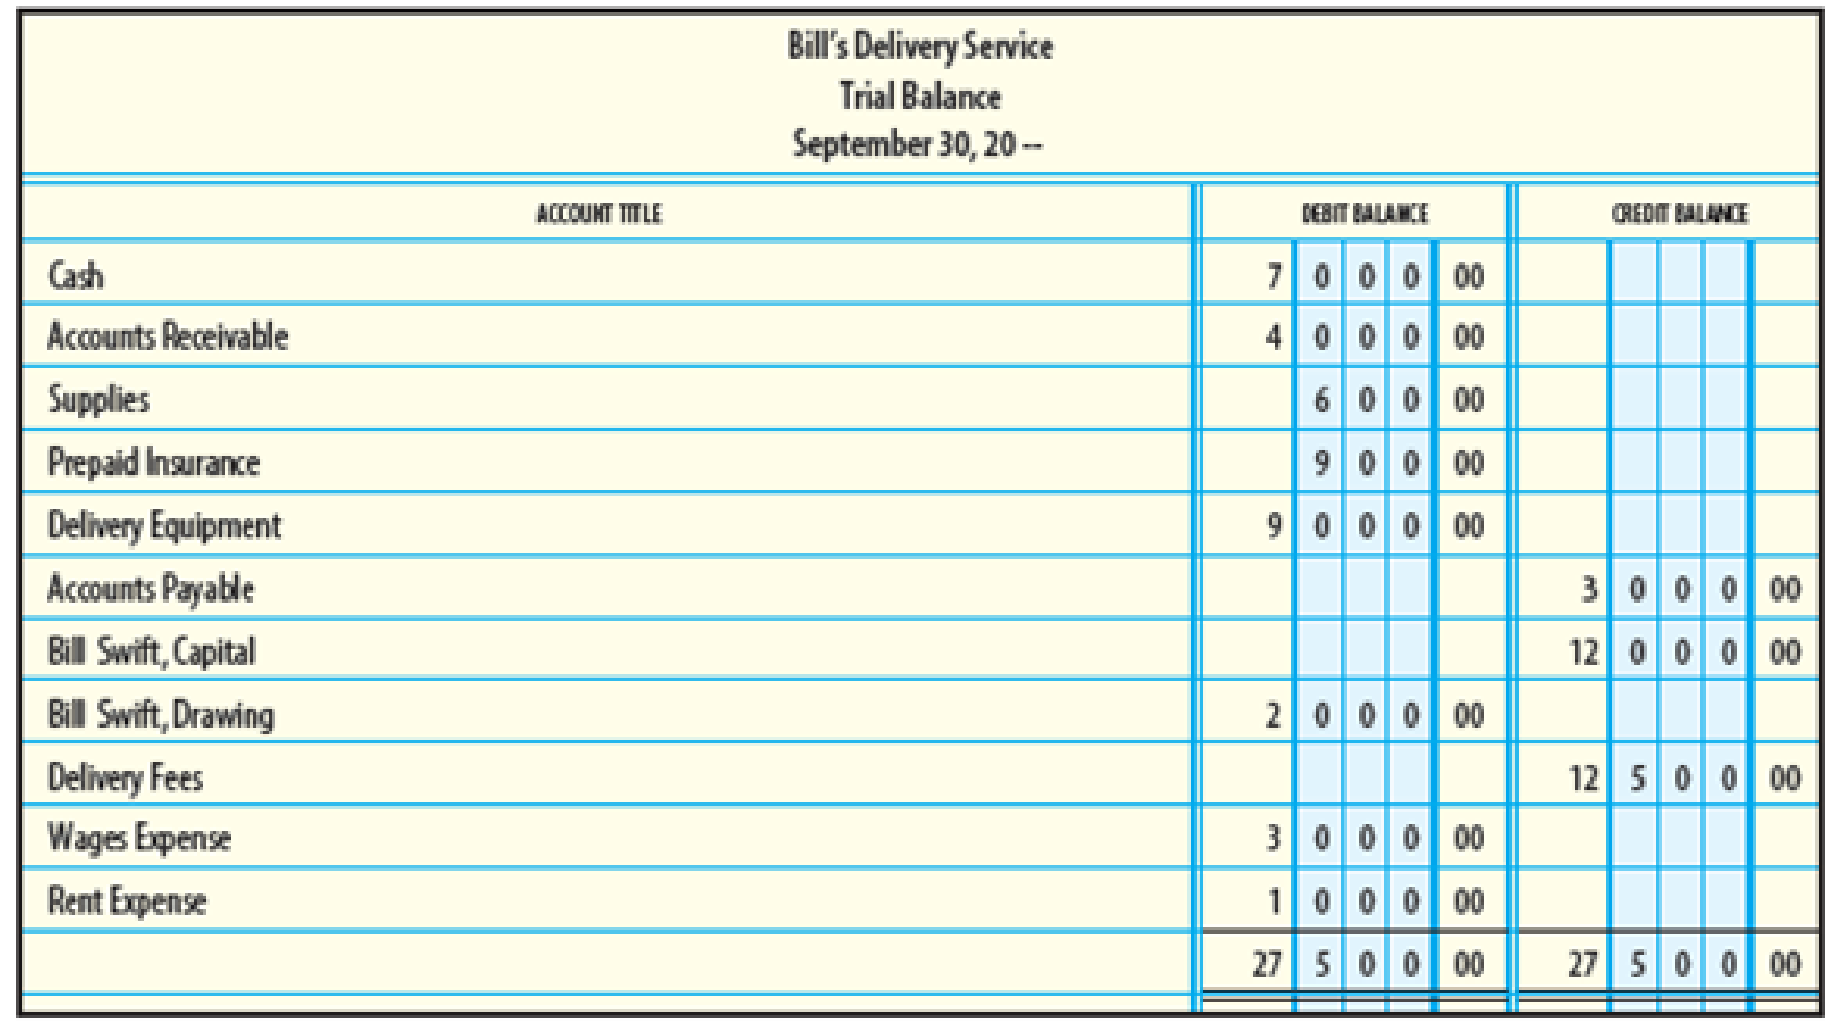 Chapter 3, Problem 11SEB, Provided below is a trial balance for Bills Delivery Service. Use this trial balance for Exercises 